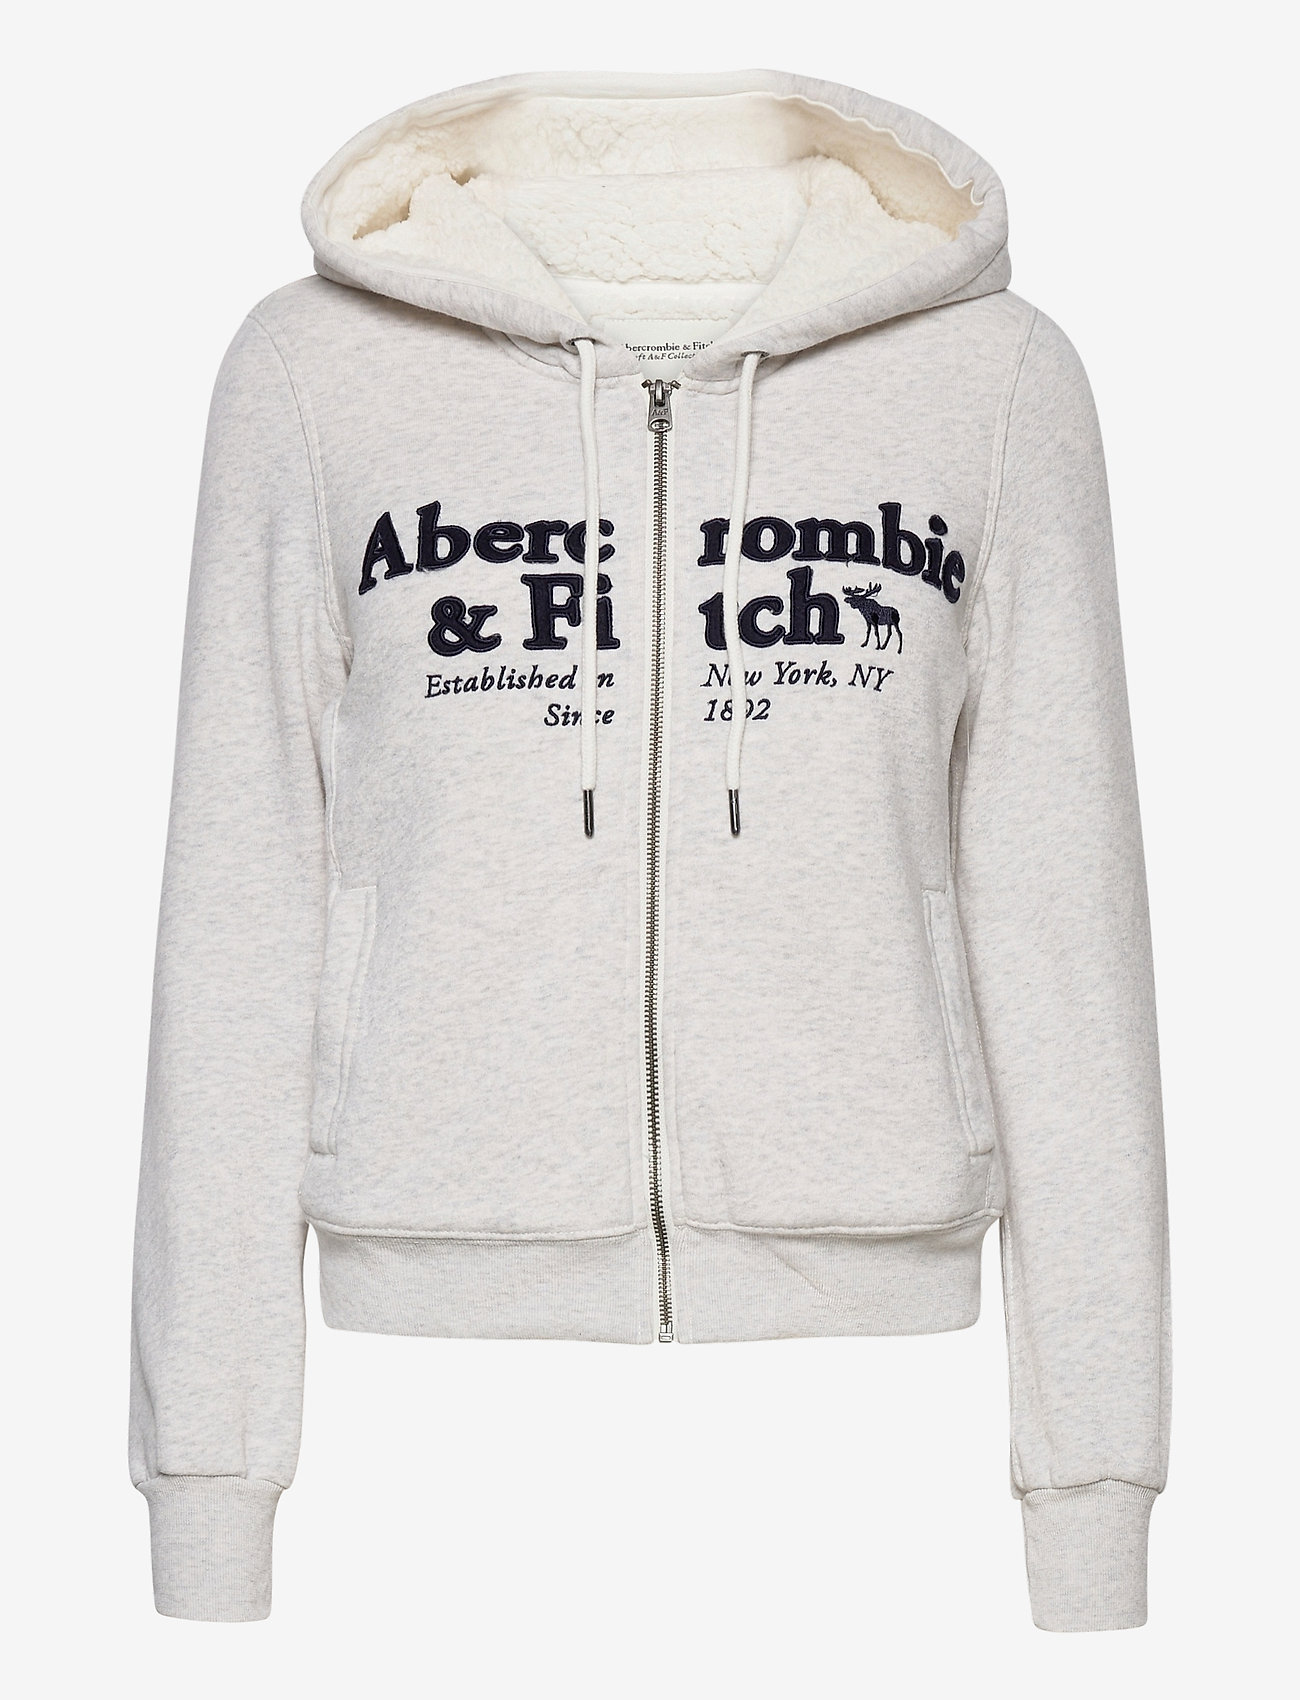 abercrombie and fitch sweatshirts